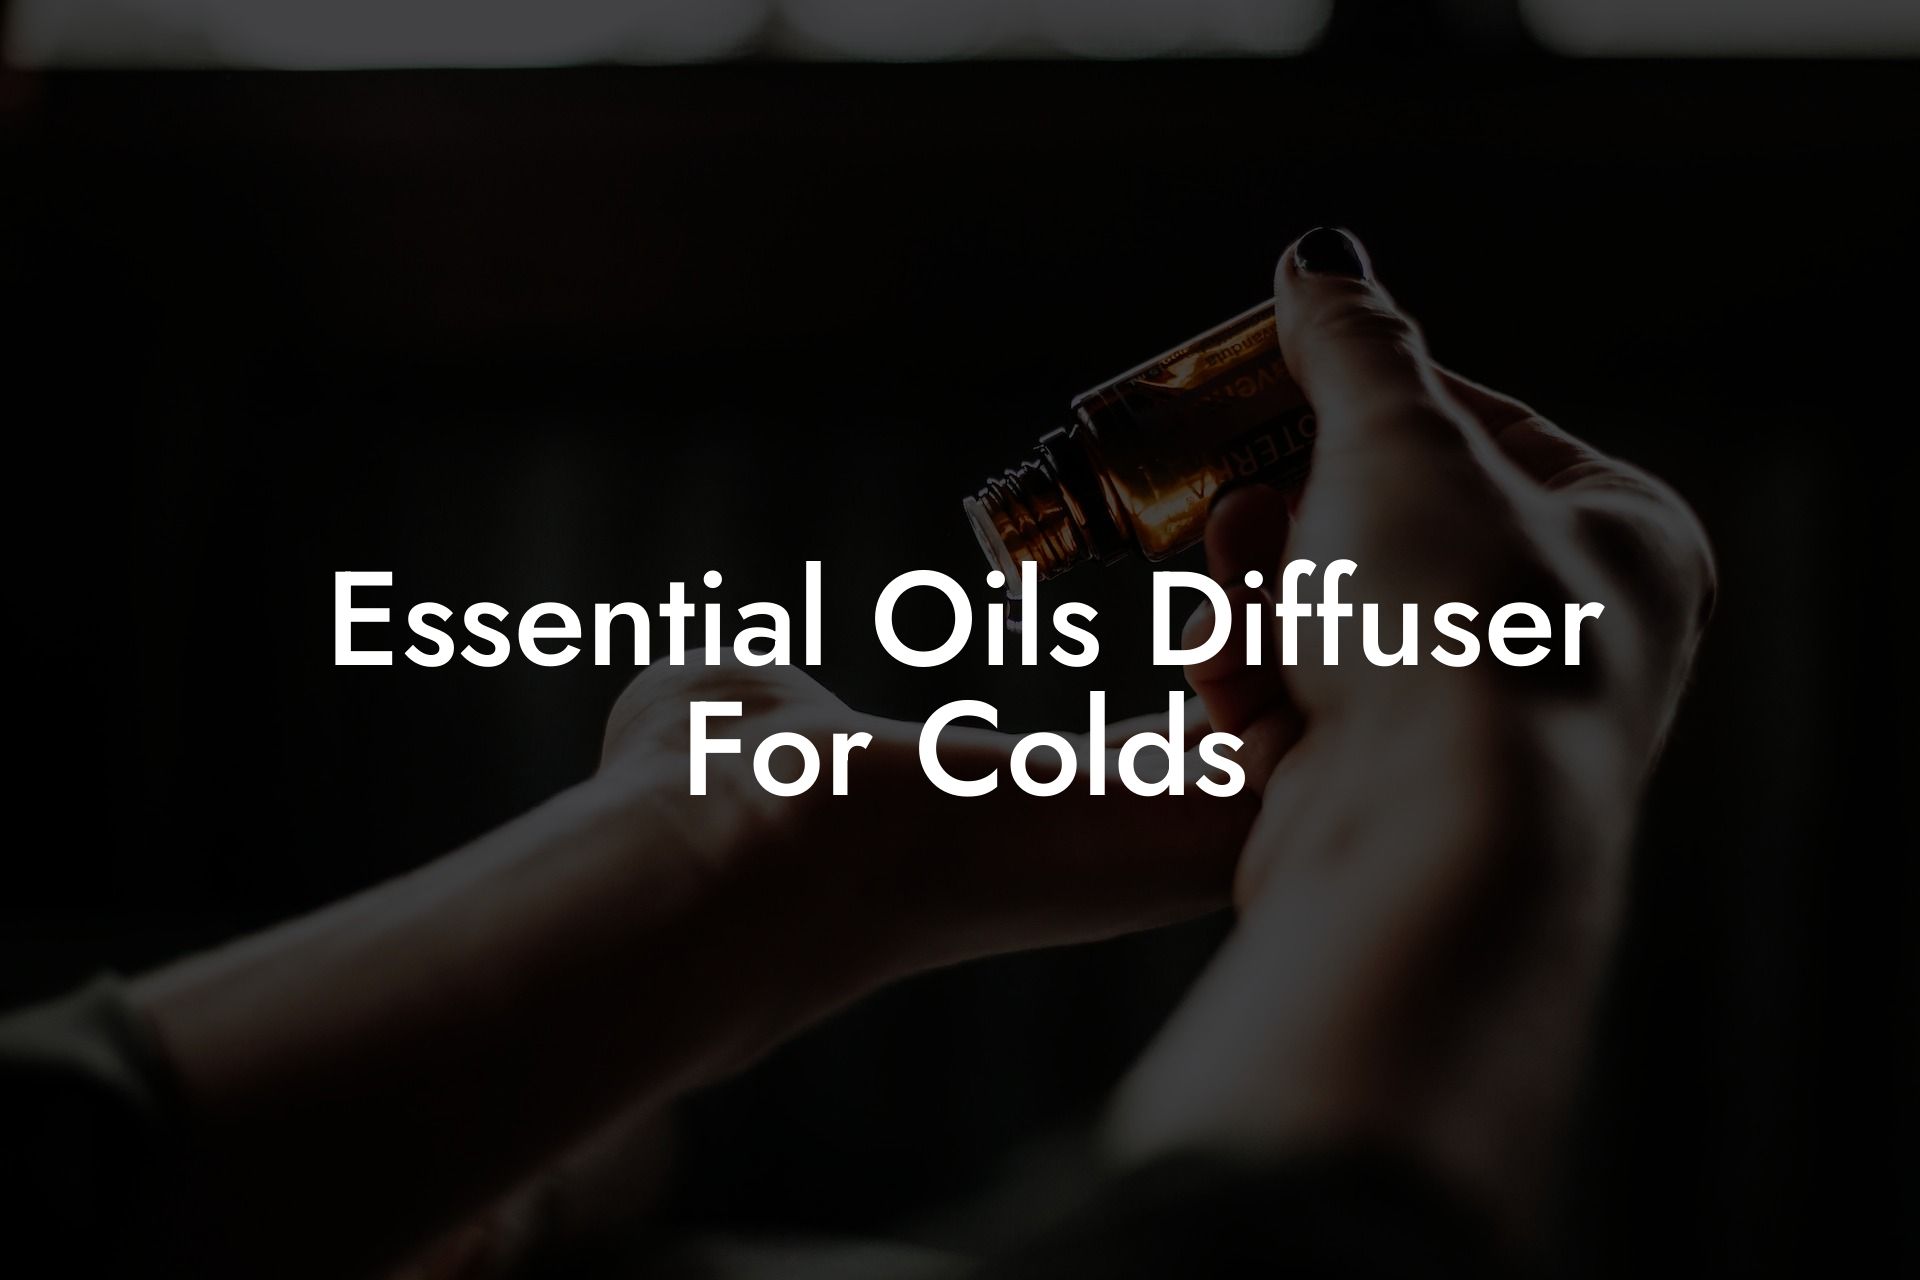 Essential Oils Diffuser For Colds